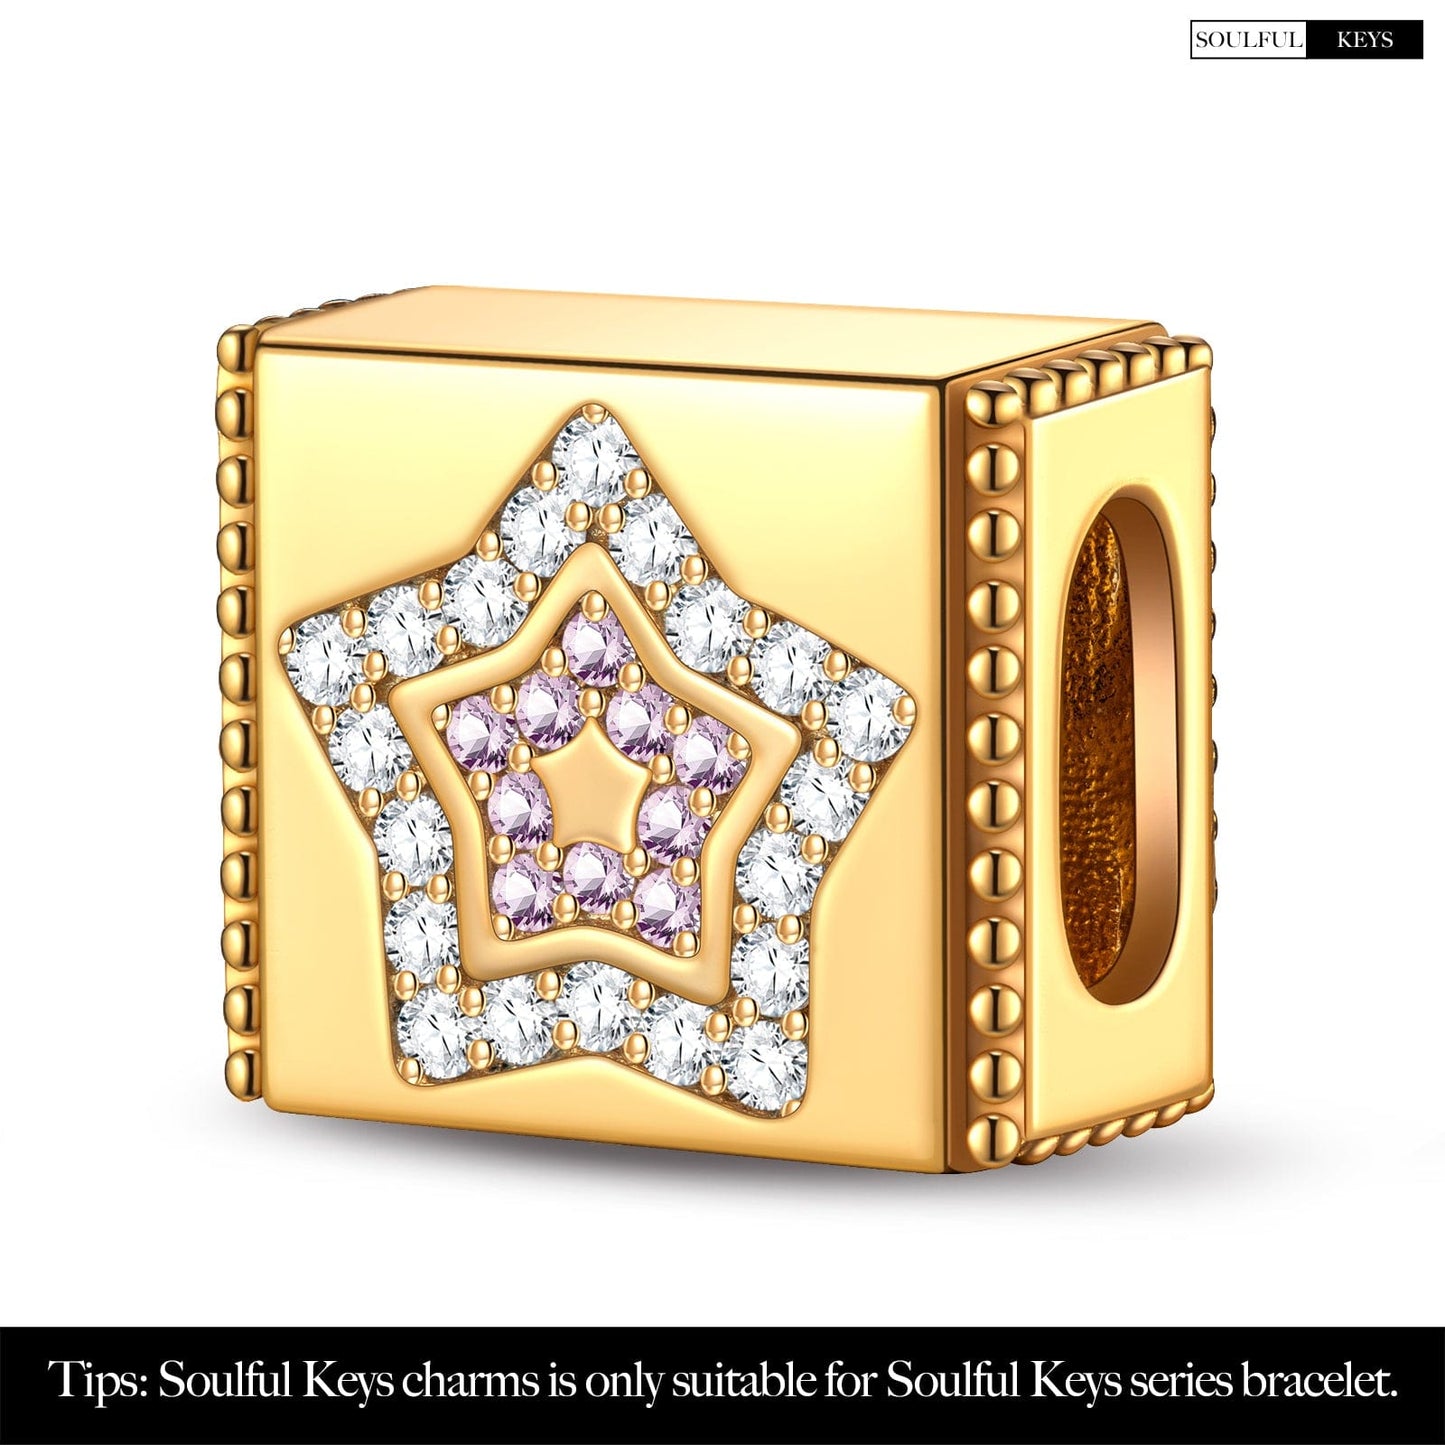 Twinkling Stars Tarnish-resistant Silver Rectangular Charms In 14K Gold Plated